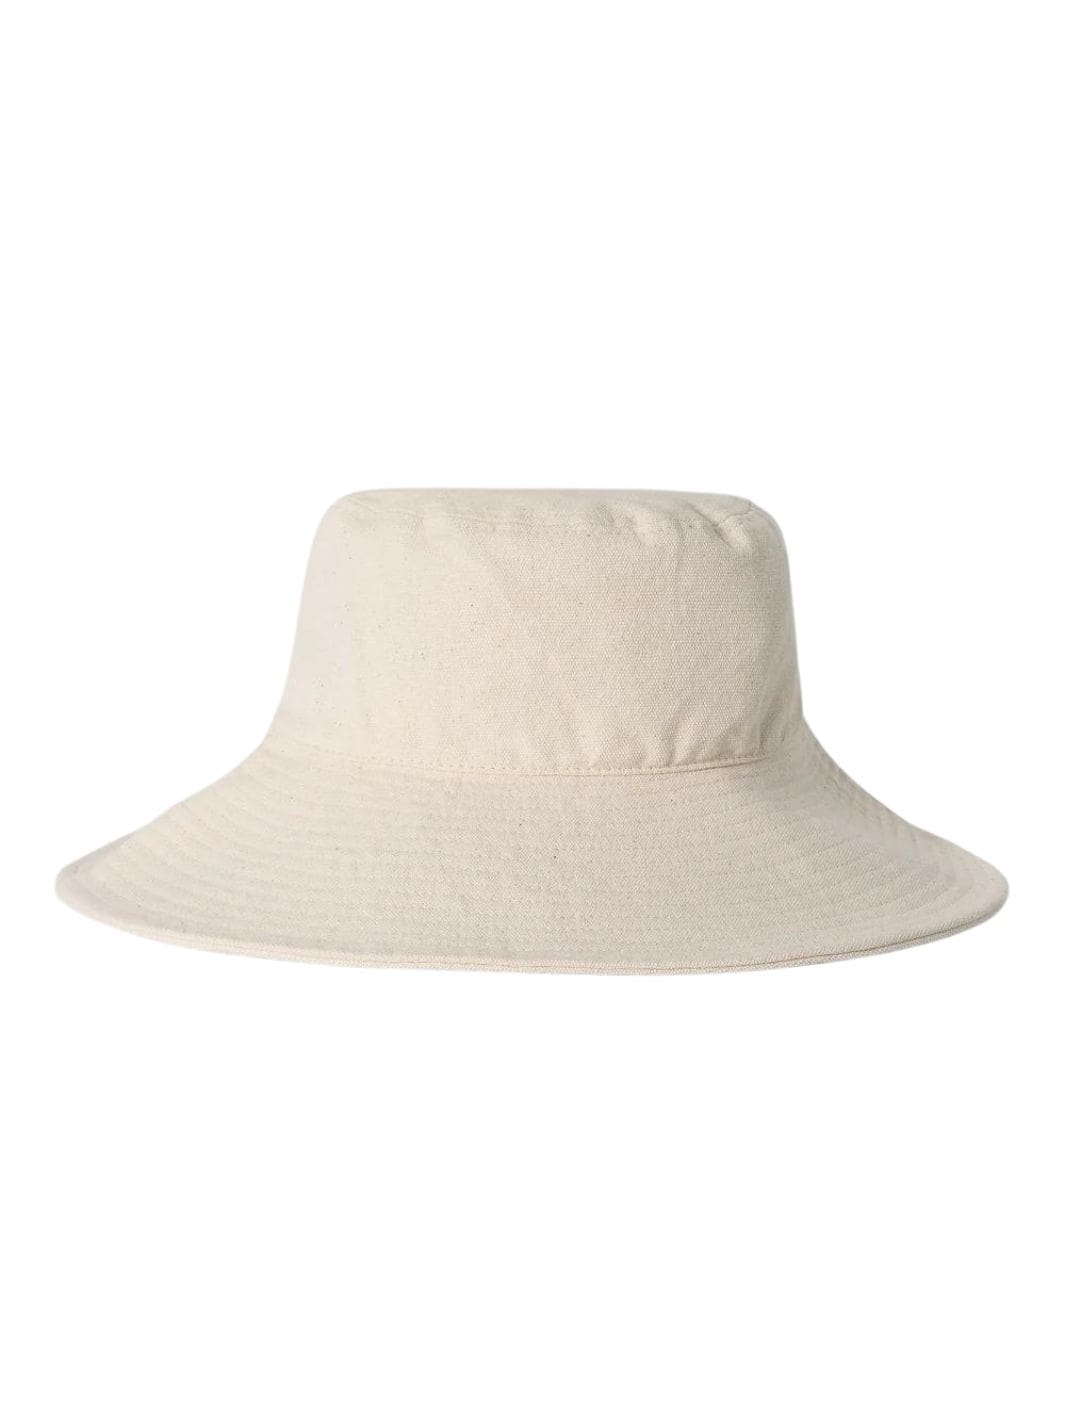 Fall Winter Spring Summer Accessories Hat | Cotton Canvas Sun Hat Natural